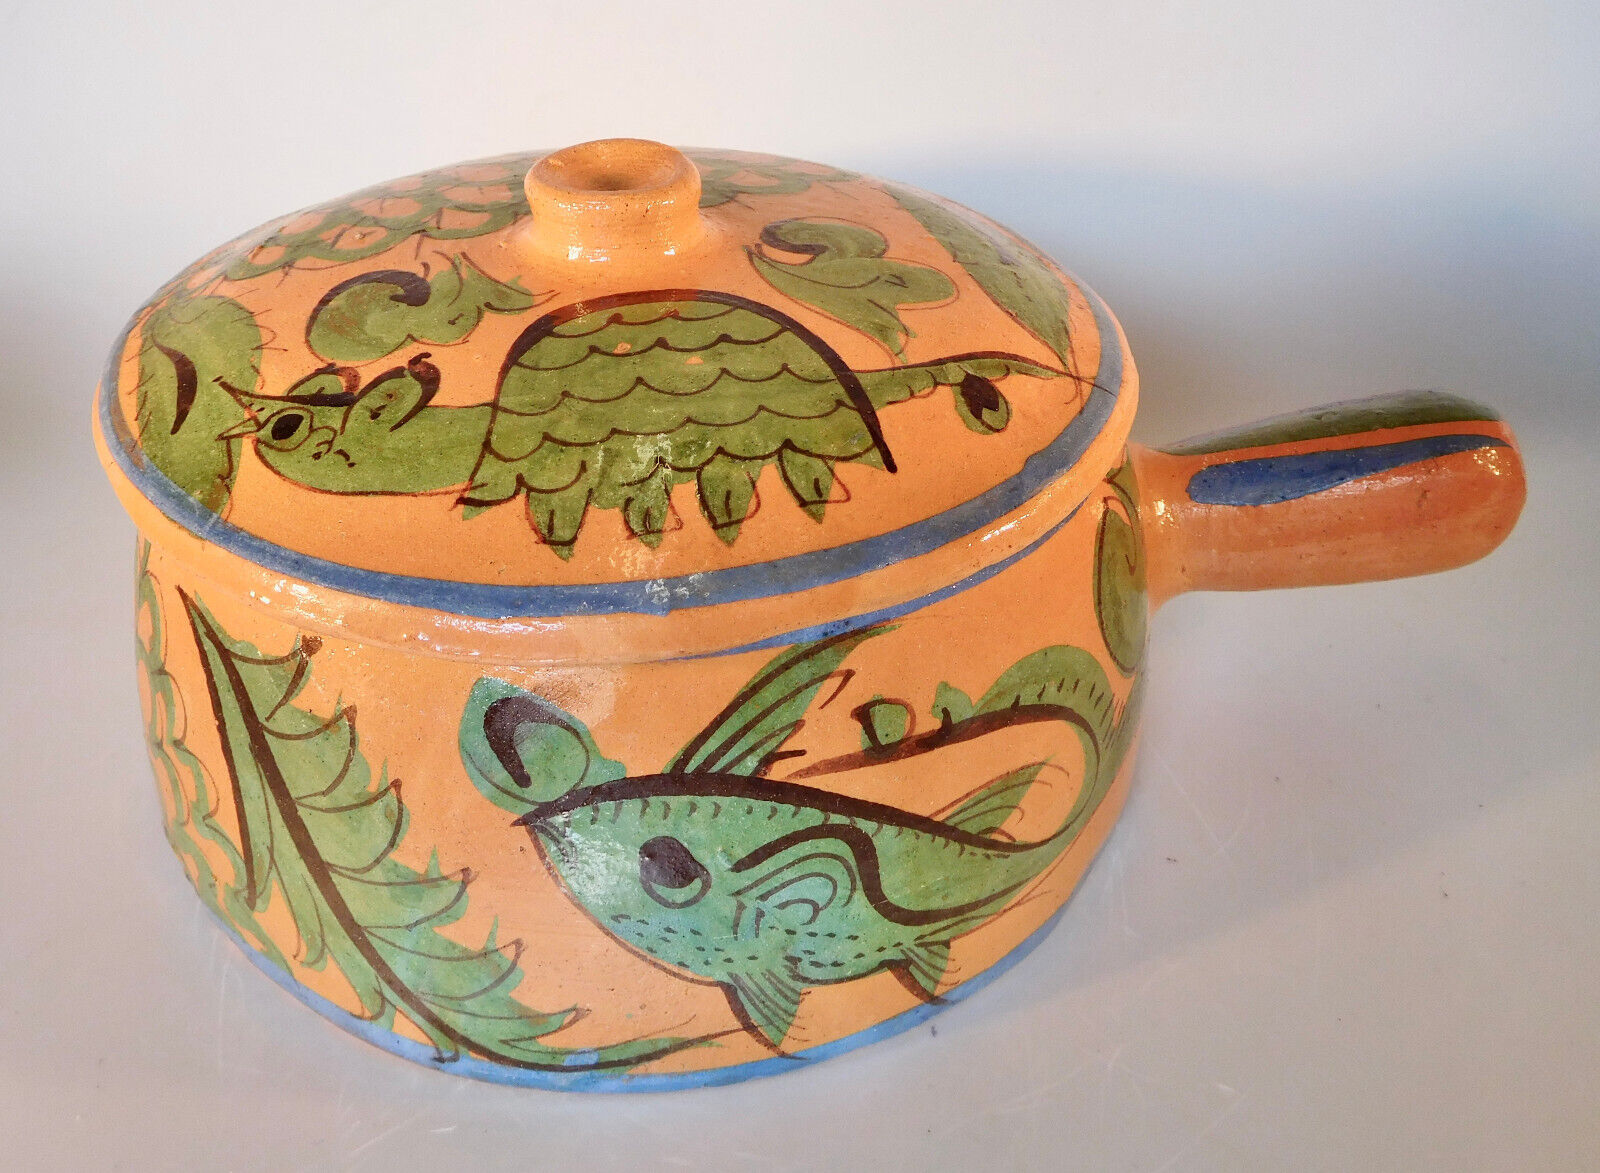 Vintage Mexican Pottery Tlaquepaque Covered Casserole Dish, Turtle & Fish